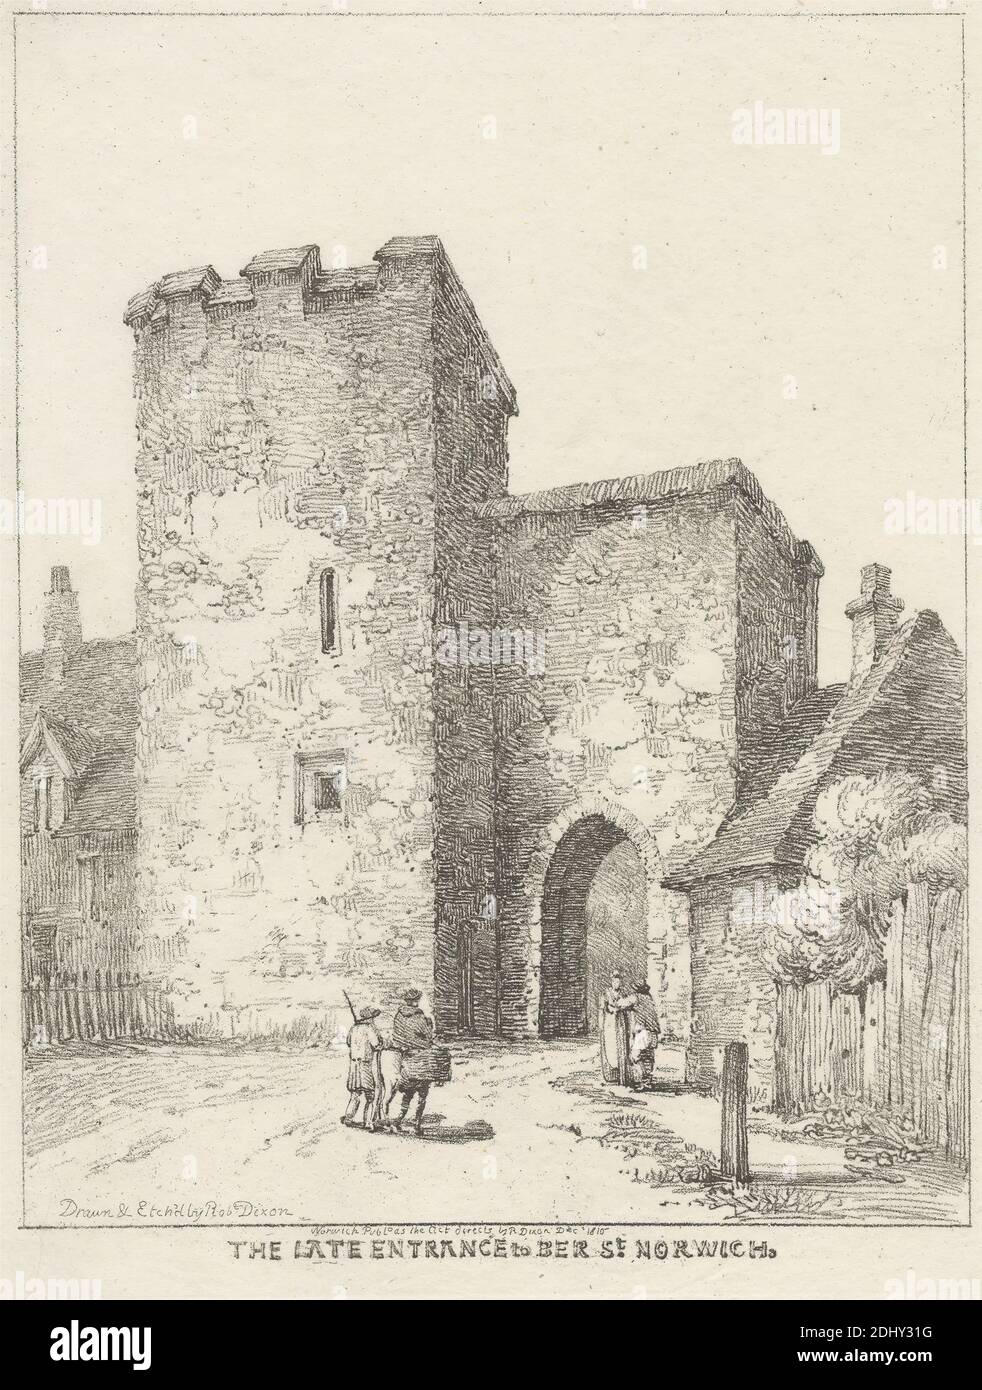 The Late Entrance to Ber Street, Norwich, Robert Dixon, 1780–1815, British, after Robert Dixon, 1780–1815, British, Published by Robert Dixon, 1780–1815, British, 1810, Soft-ground etching on medium, slightly textured, cream wove paper, Sheet: 10 5/8 x 8 1/8 inches (27 x 20.7 cm), Plate: 9 3/4 x 7 13/16 inches (24.8 x 19.8 cm), and Image: 8 3/4 x 6 7/8 inches (22.3 x 17.5 cm), arch, architectural subject, fences, gate, genre subject, hats, horse (animal), houses, illustration, men, peasants, riding, road, stone, street, tower (building division), walking, women, England, Europe, Norfolk Stock Photo